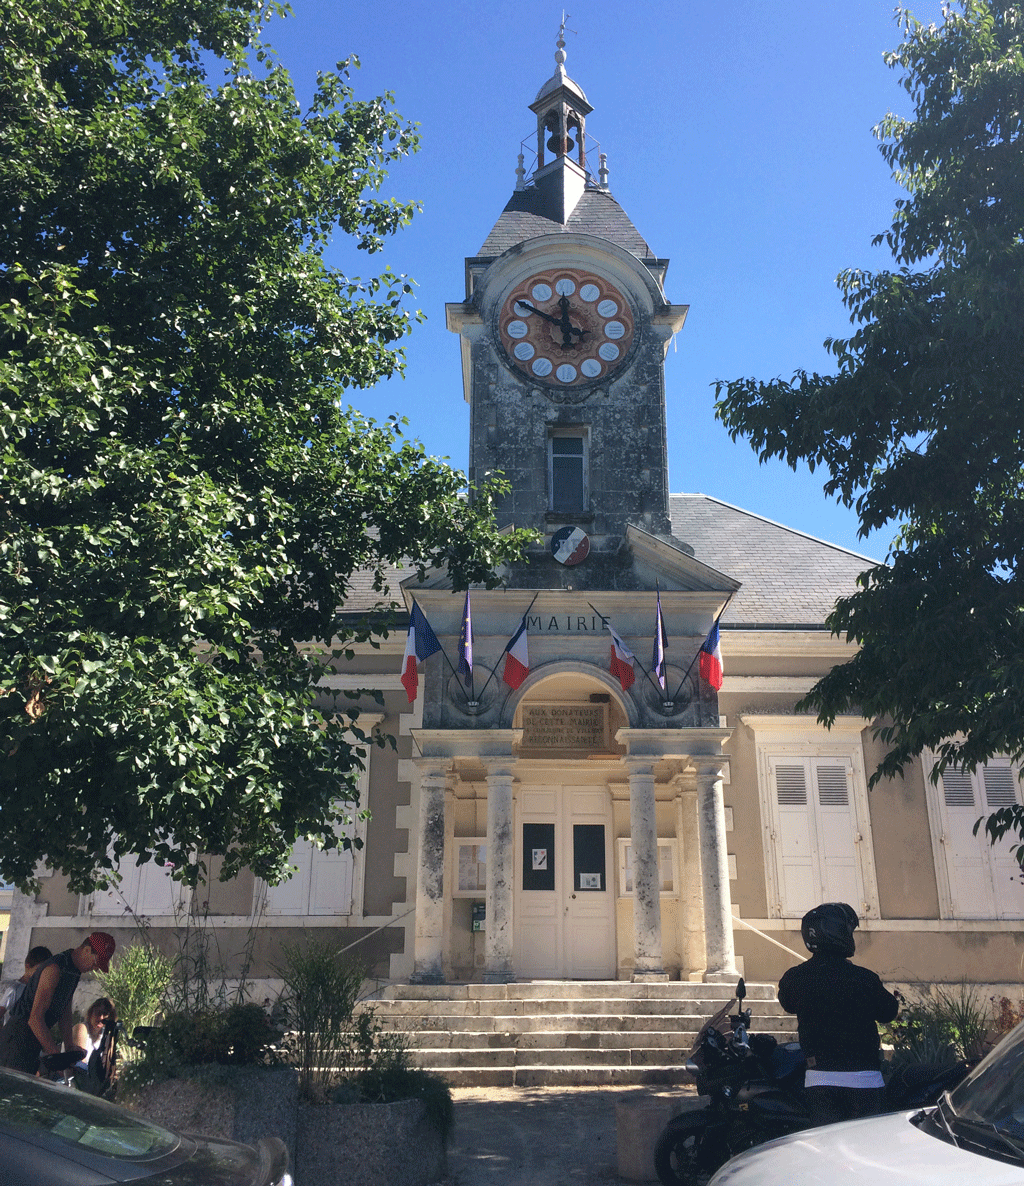 The town hall in Villiers-sur-Loir with its 2-metre diameter monumental clock